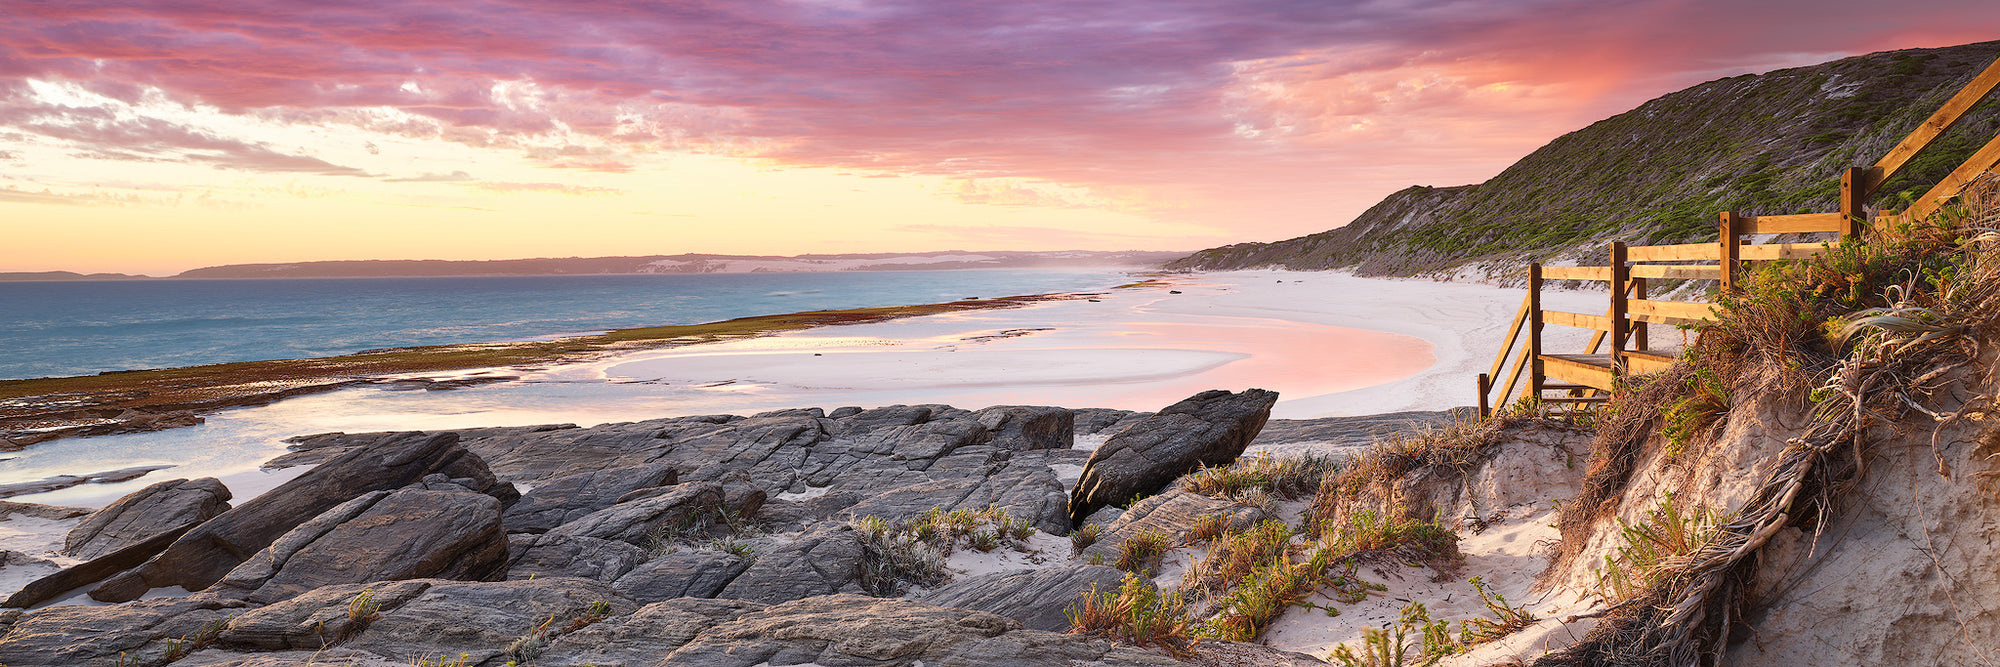 Eleven Mile beach summer evening rocky foreground with pink sky Esperance panorama